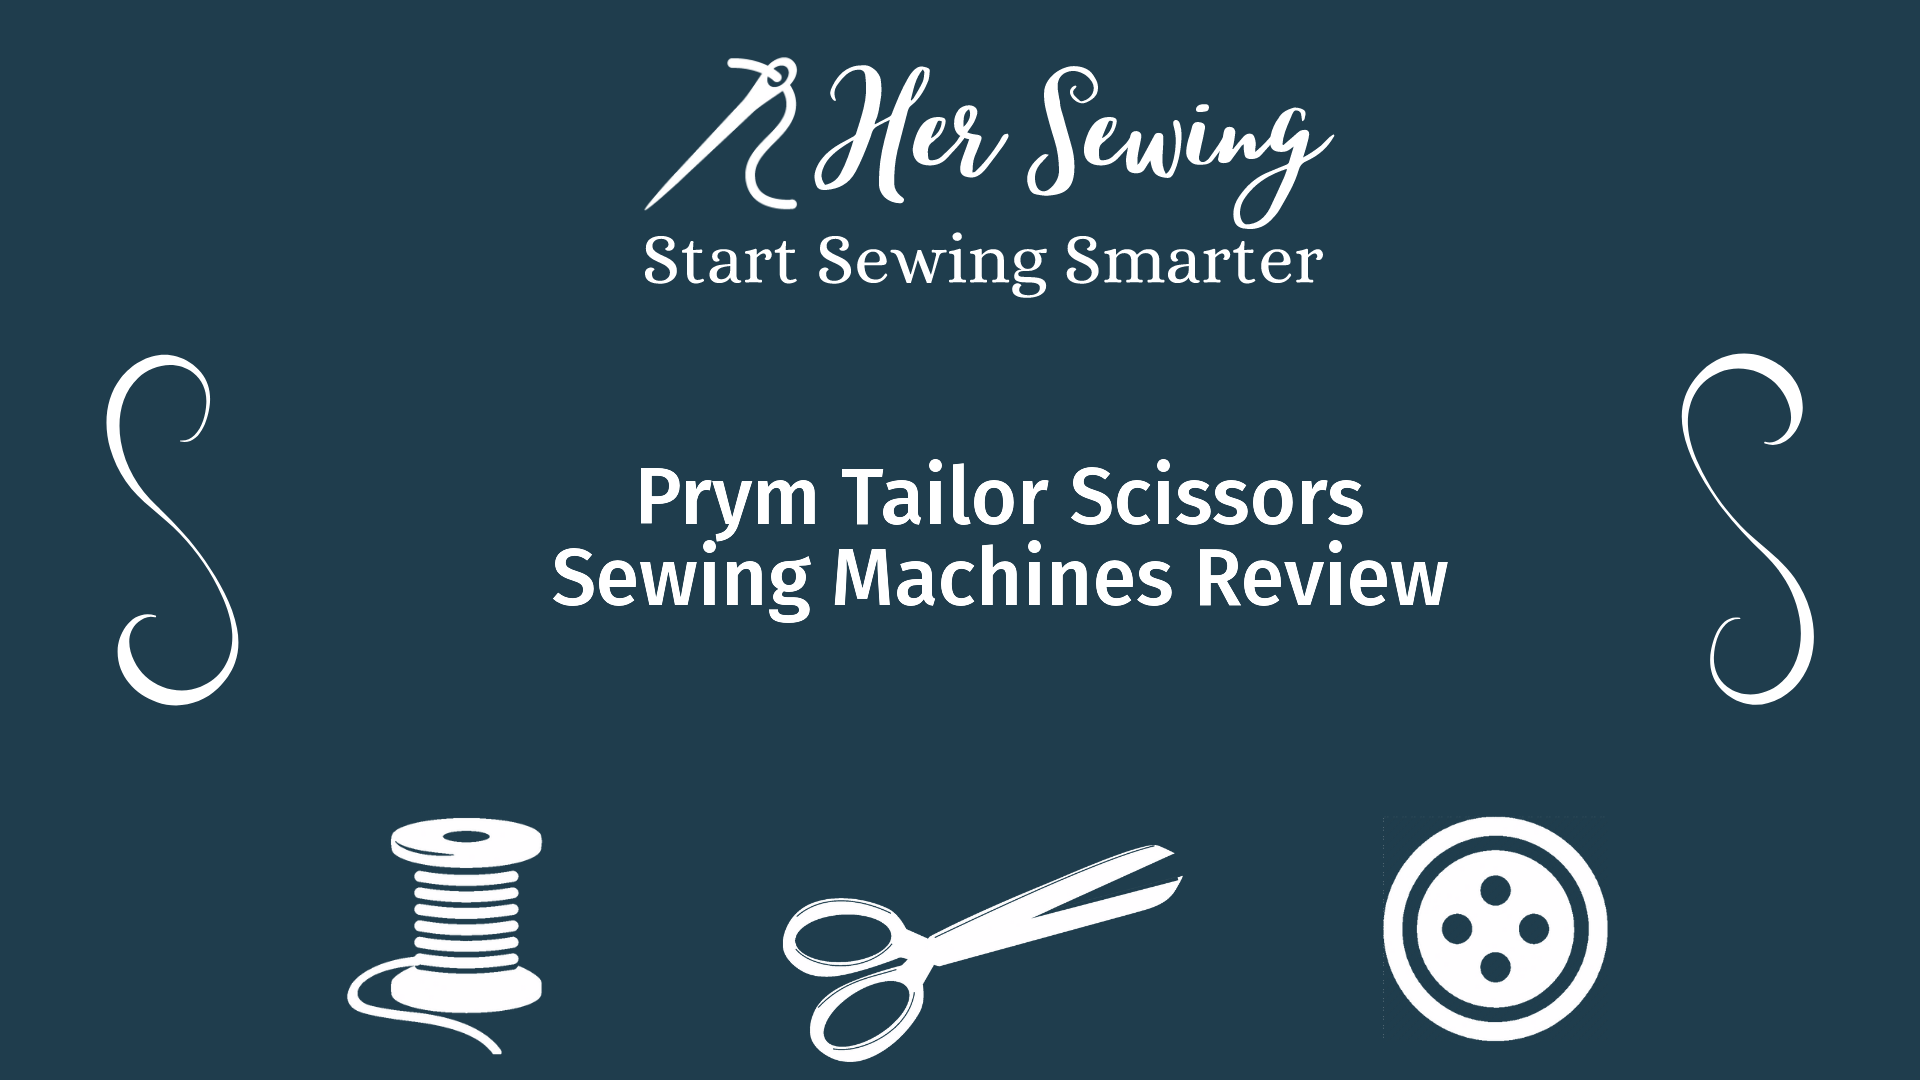 Prym Tailor Scissors Sewing Machines Review